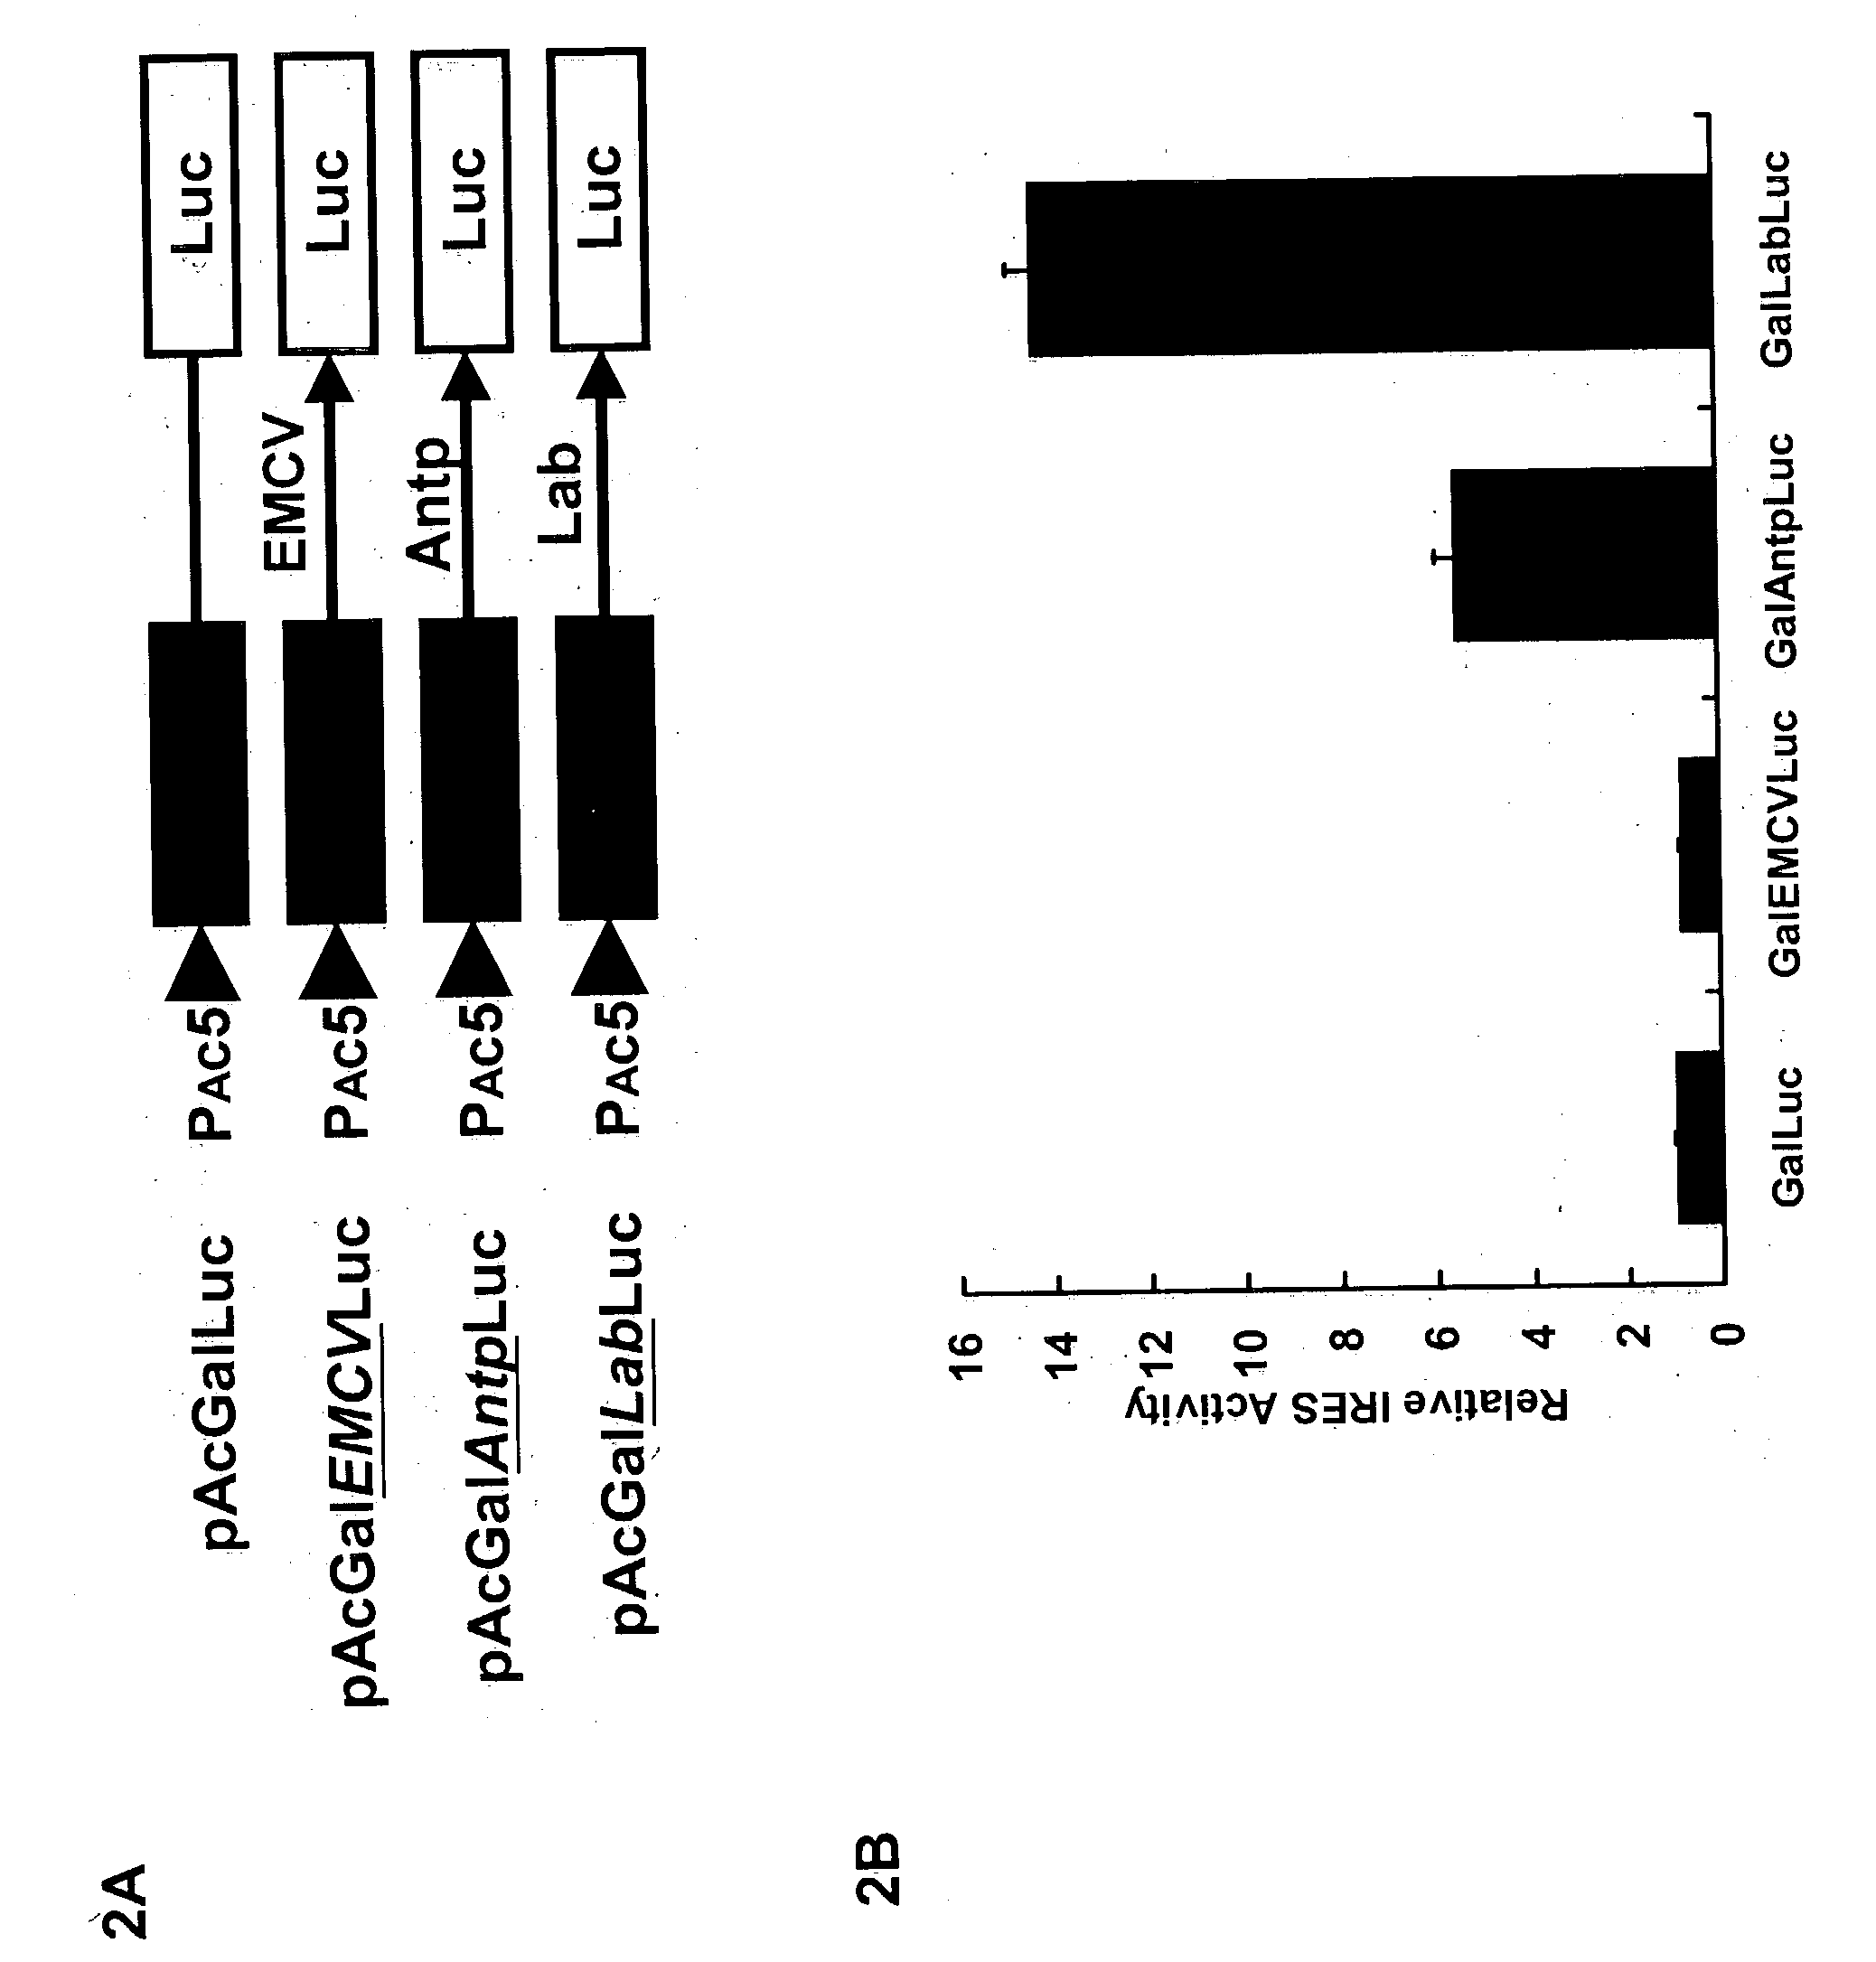 Internal ribosome entry site of the labial gene for protein expression